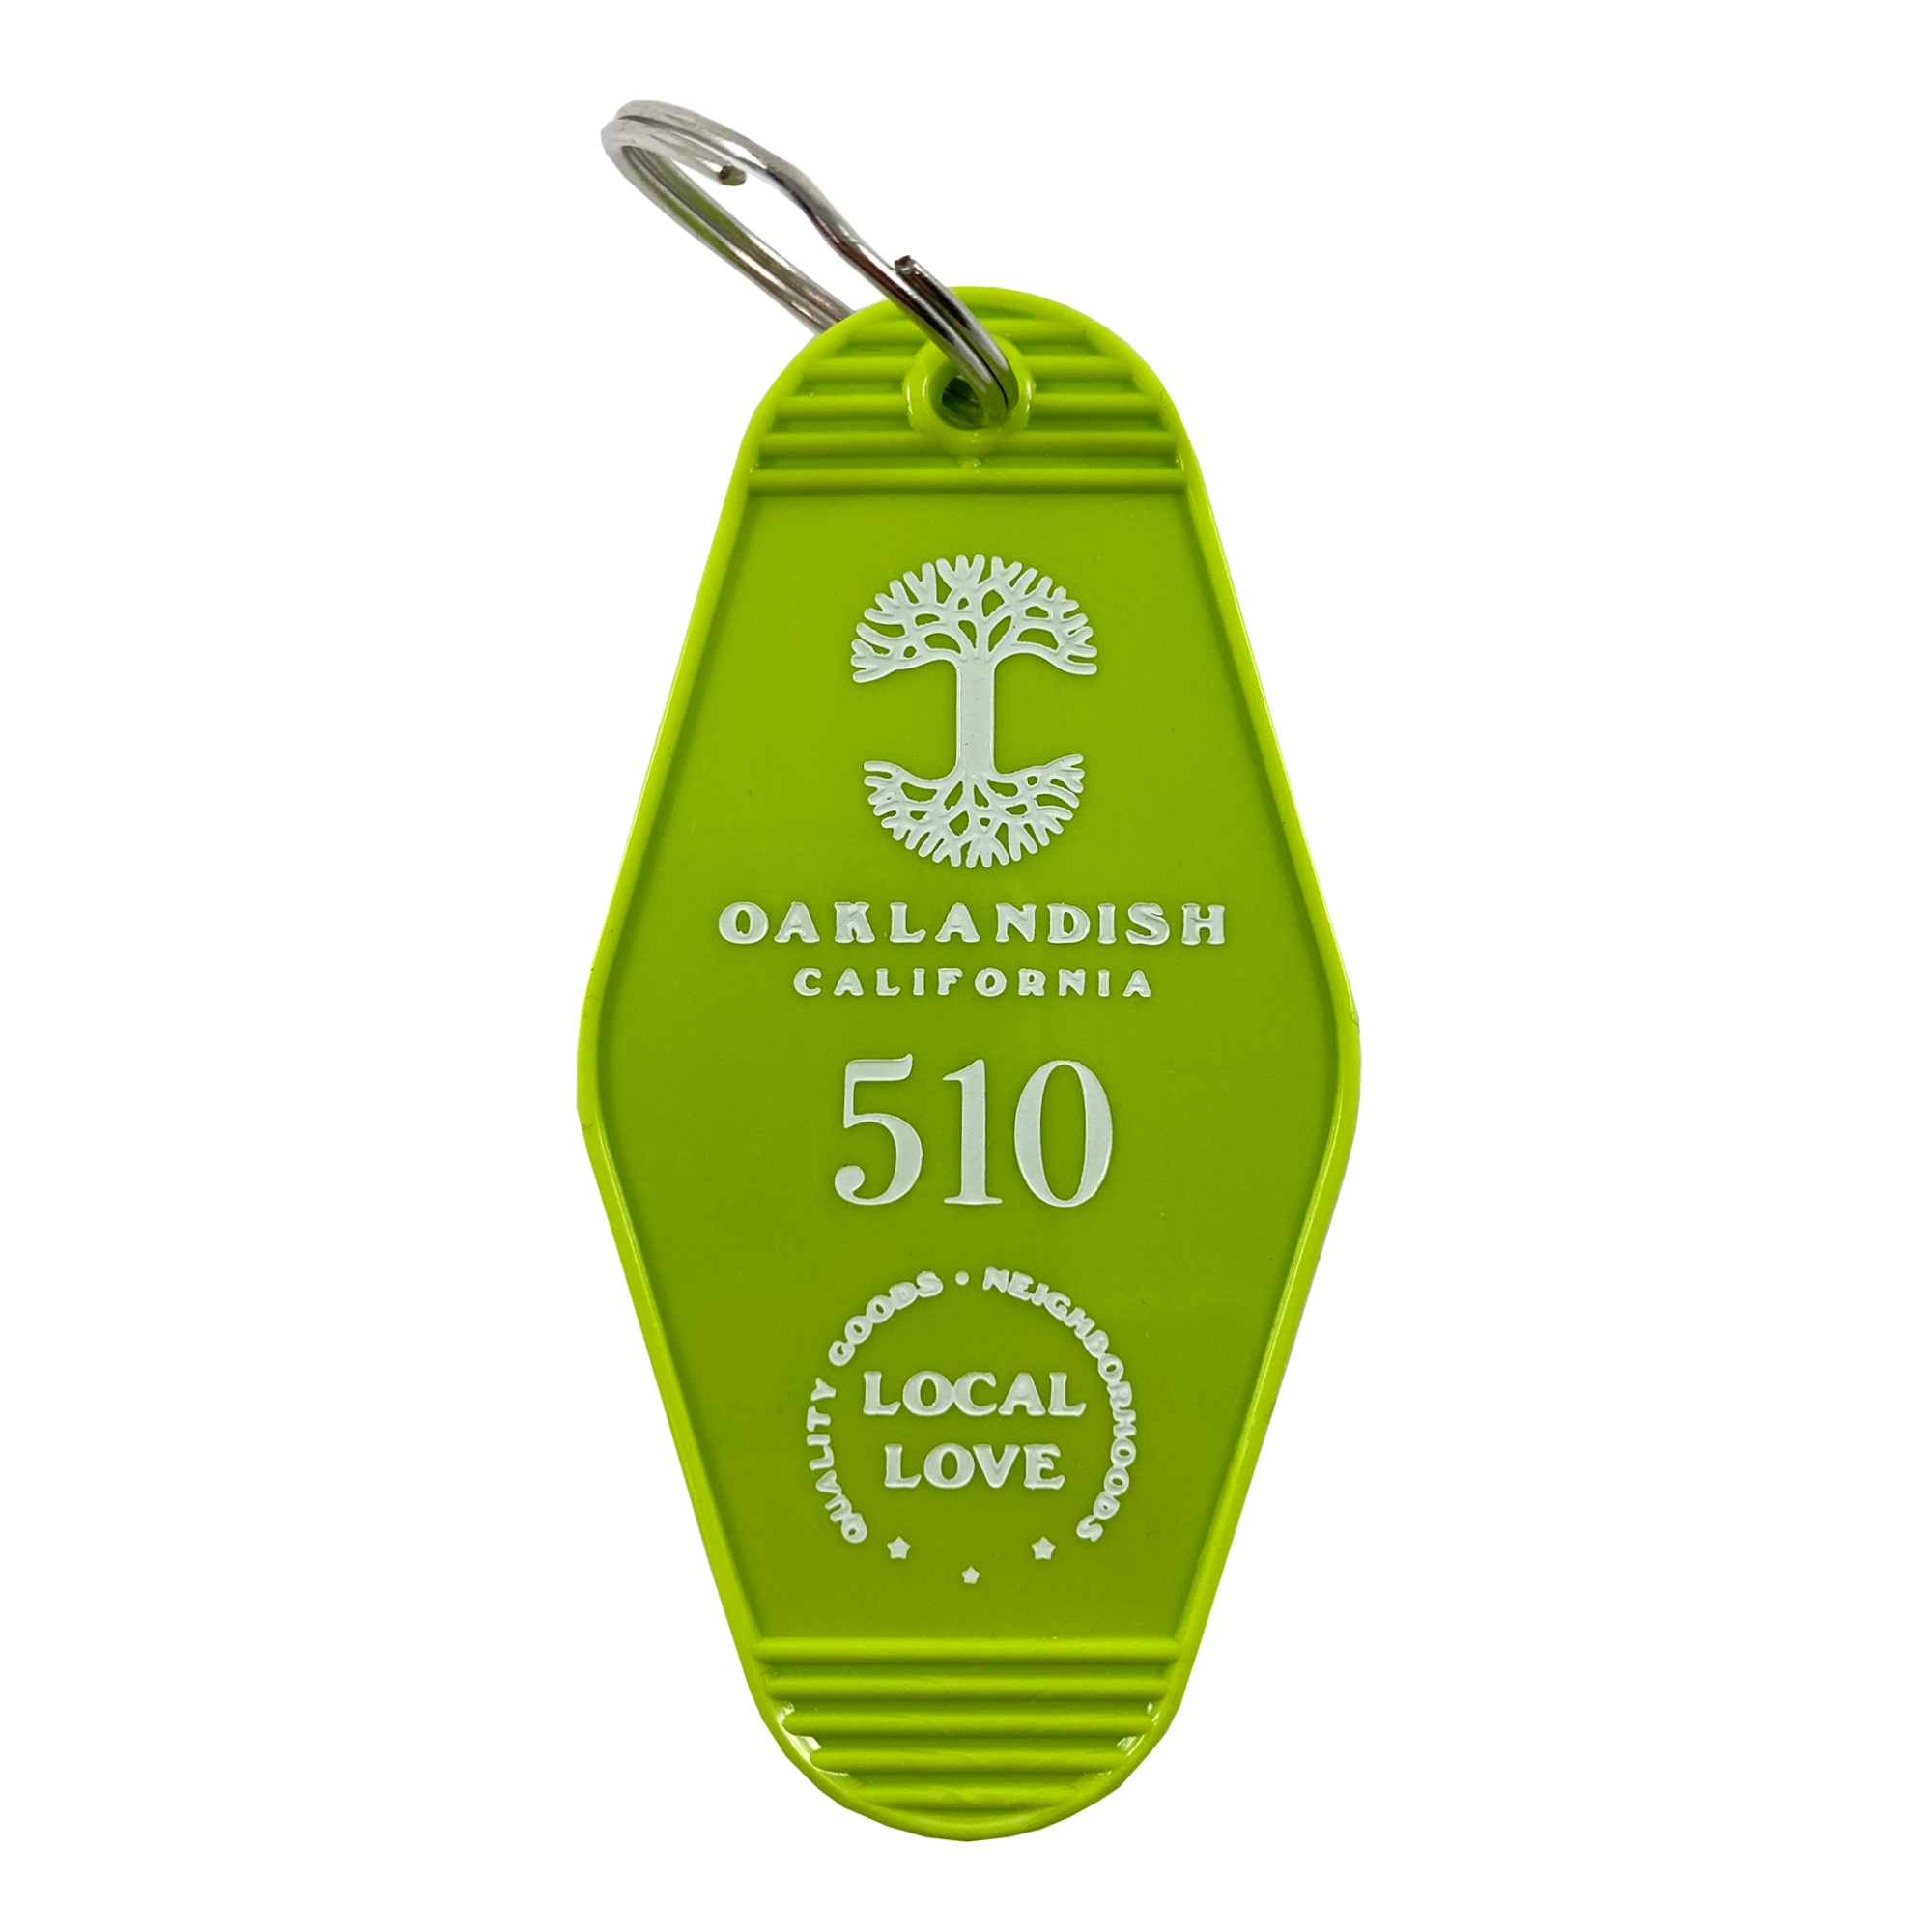 Lime green vintage motel-style keychain with gold Oaklandish Logo and wordmark and 510 local love logo.